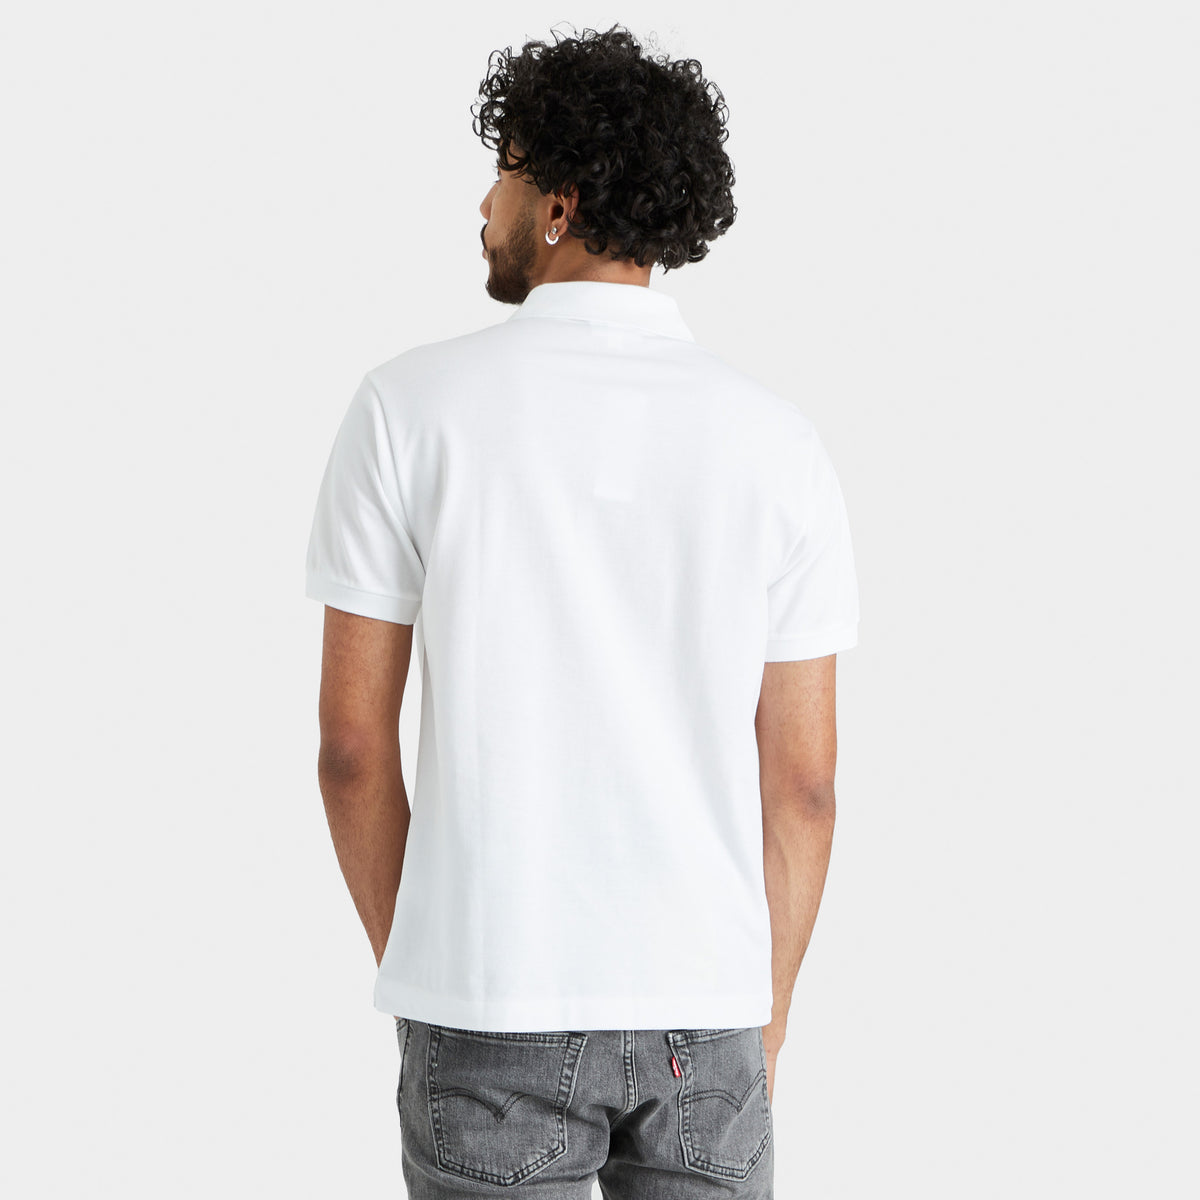 Lacoste Polo Shirts - Clothing - JD Sports Global